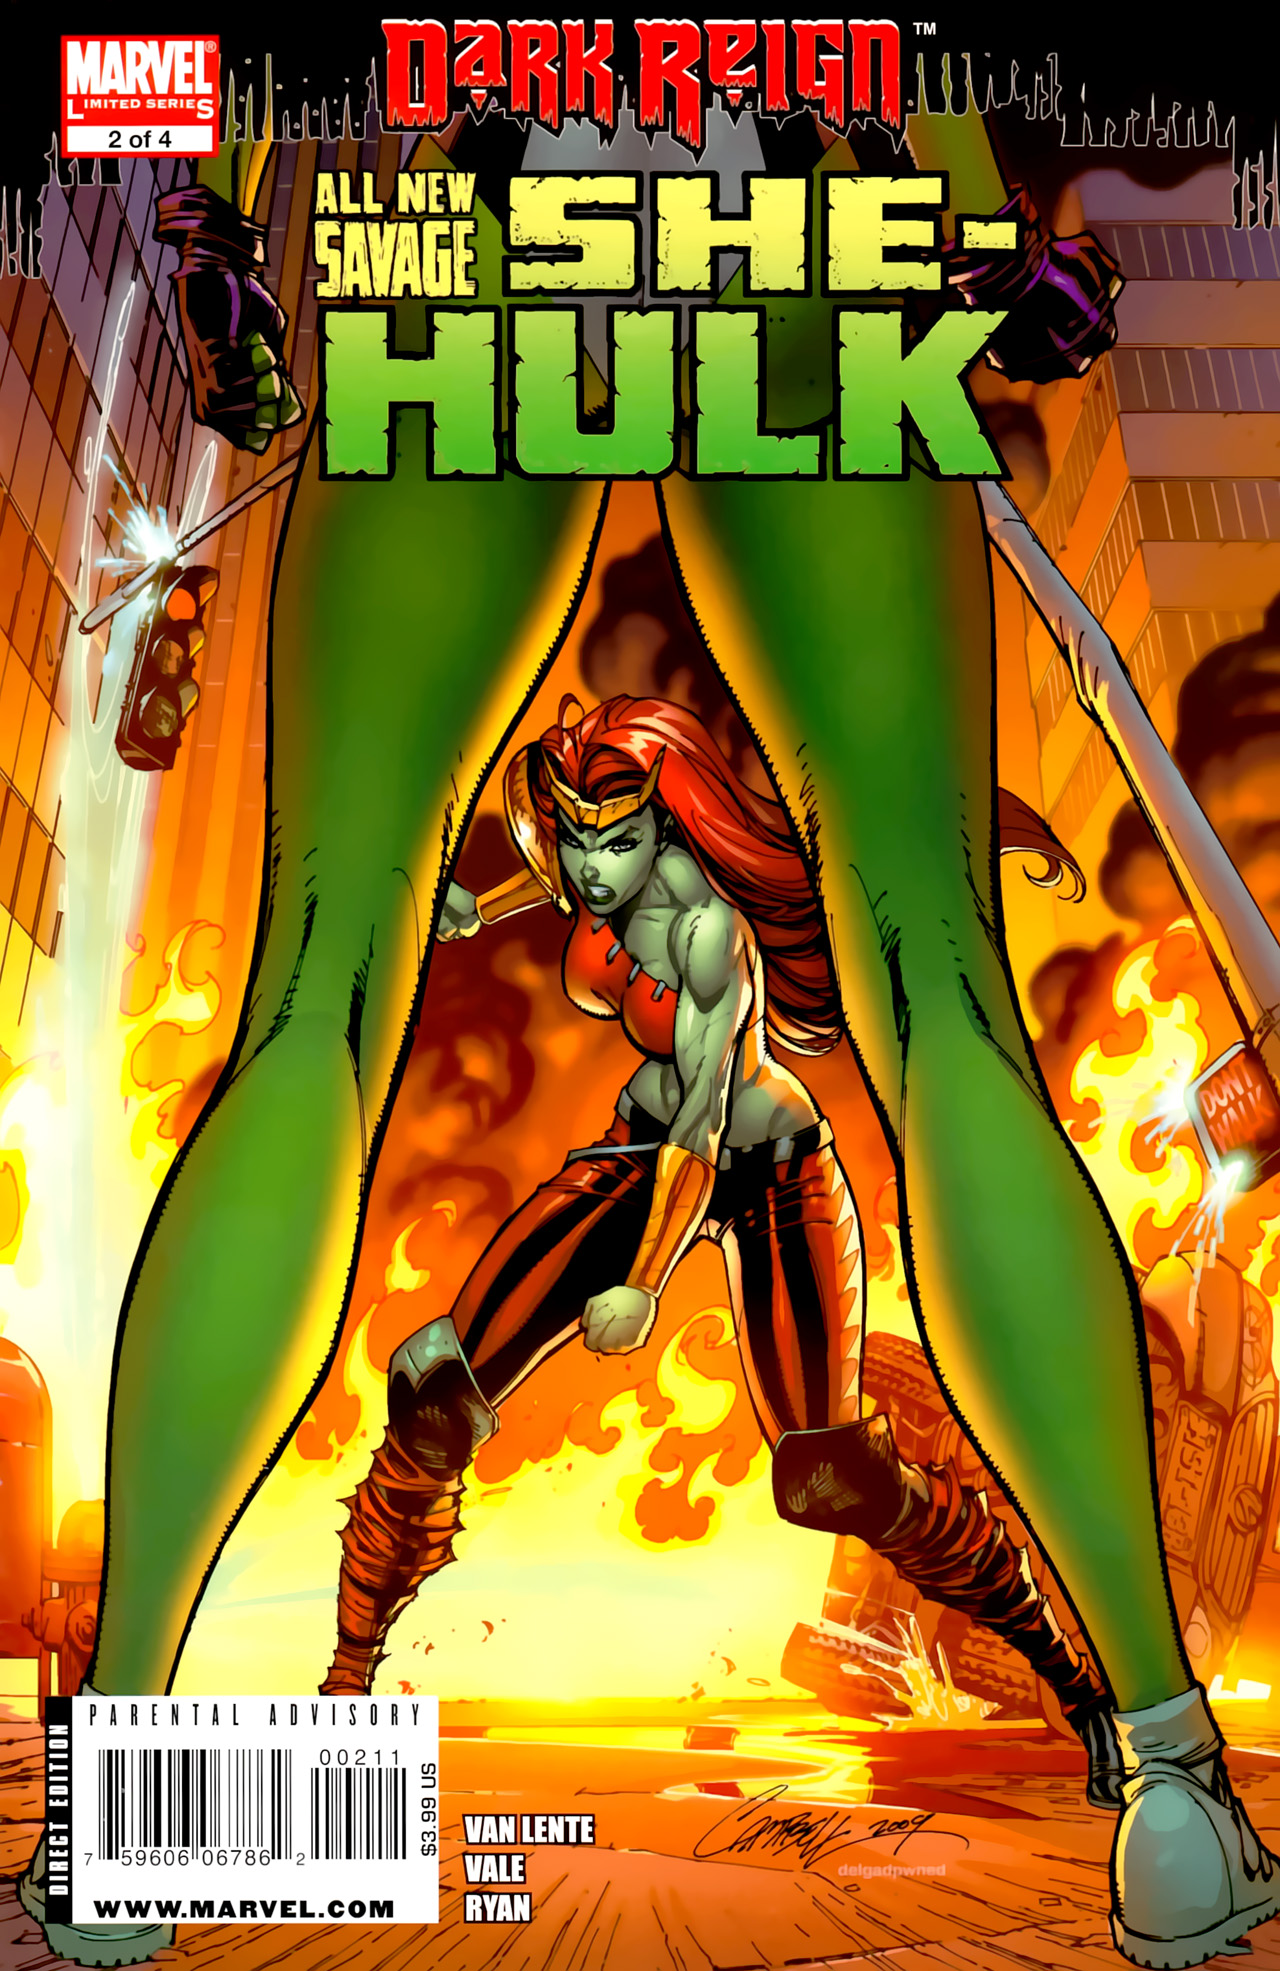 Savage She Hulk Issue 2 Read Savage She Hulk Issue 2 Comic Online In